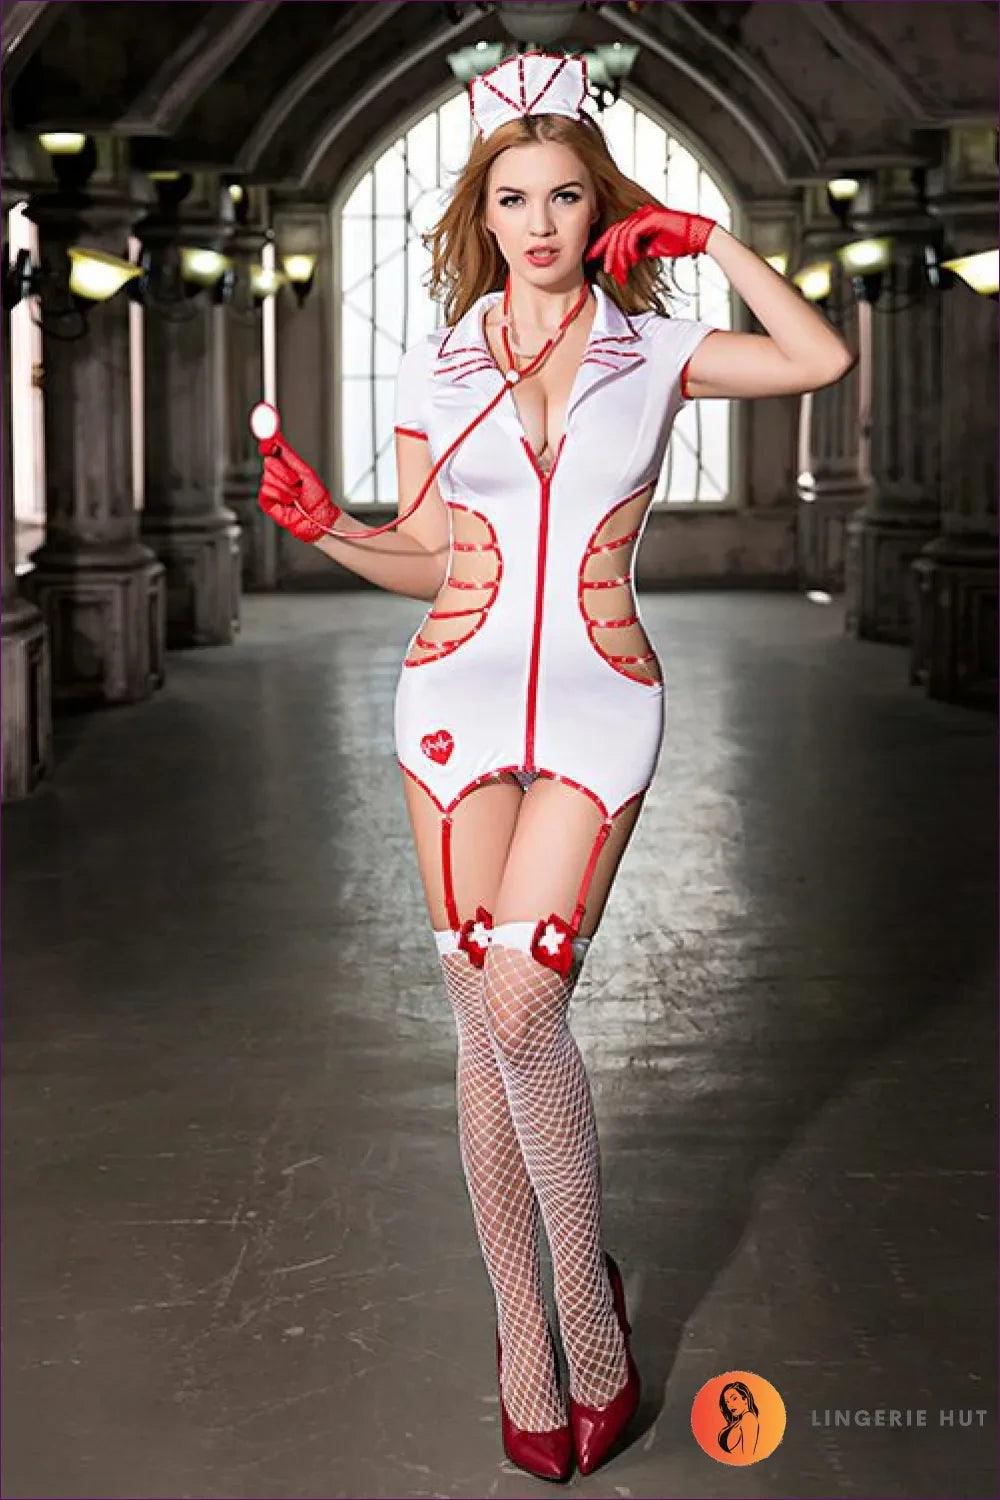 Mesmerizing, Cutout Corset, Stocking Set! Unleash Your Inner Goddess With Unparalleled Design And Daring